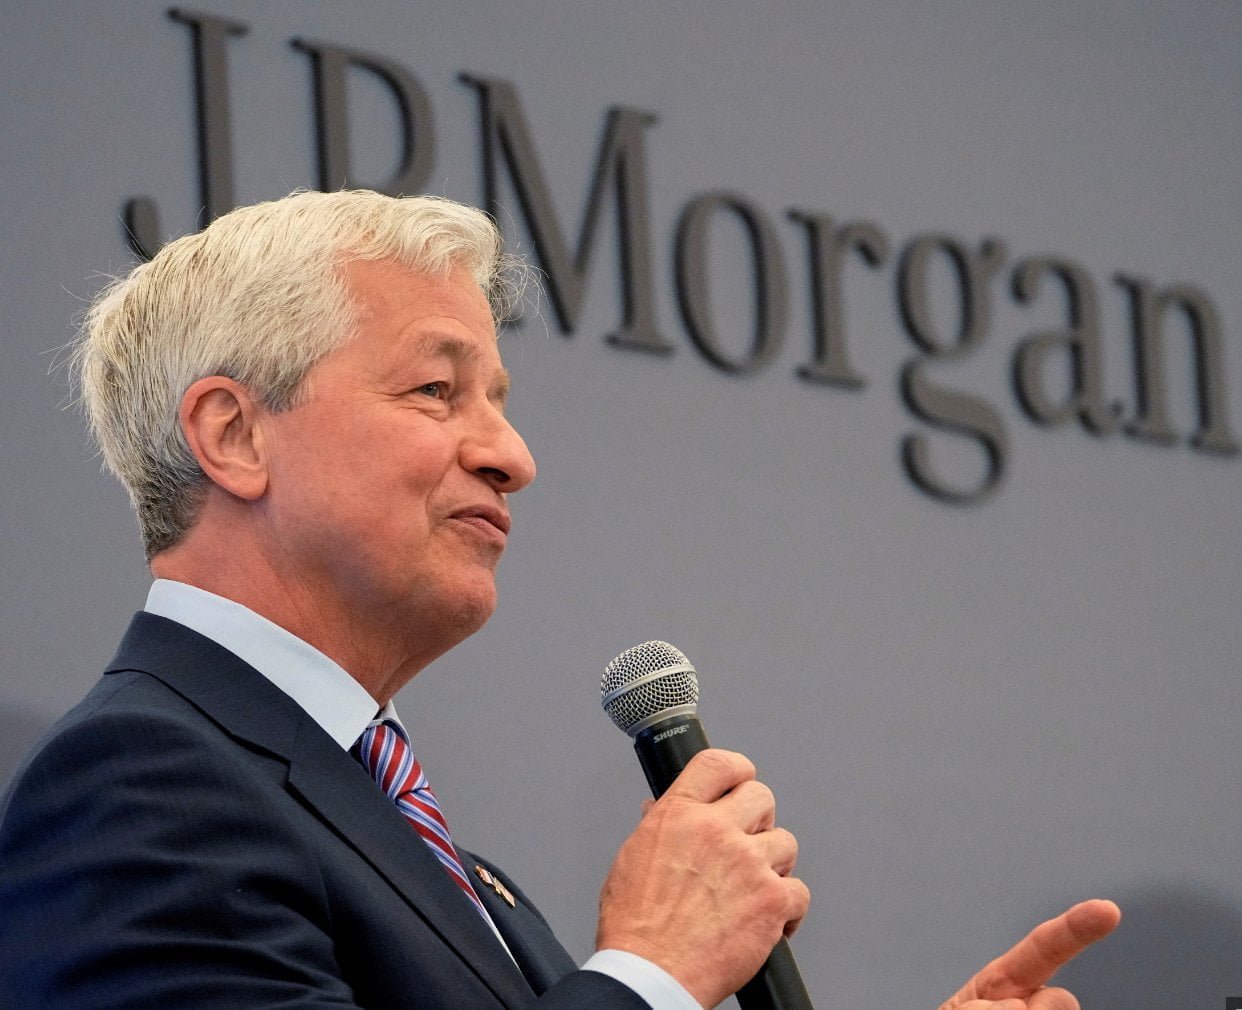 JPMorgan Chase Acquires First Republic Bank After U.S. Government Takeover